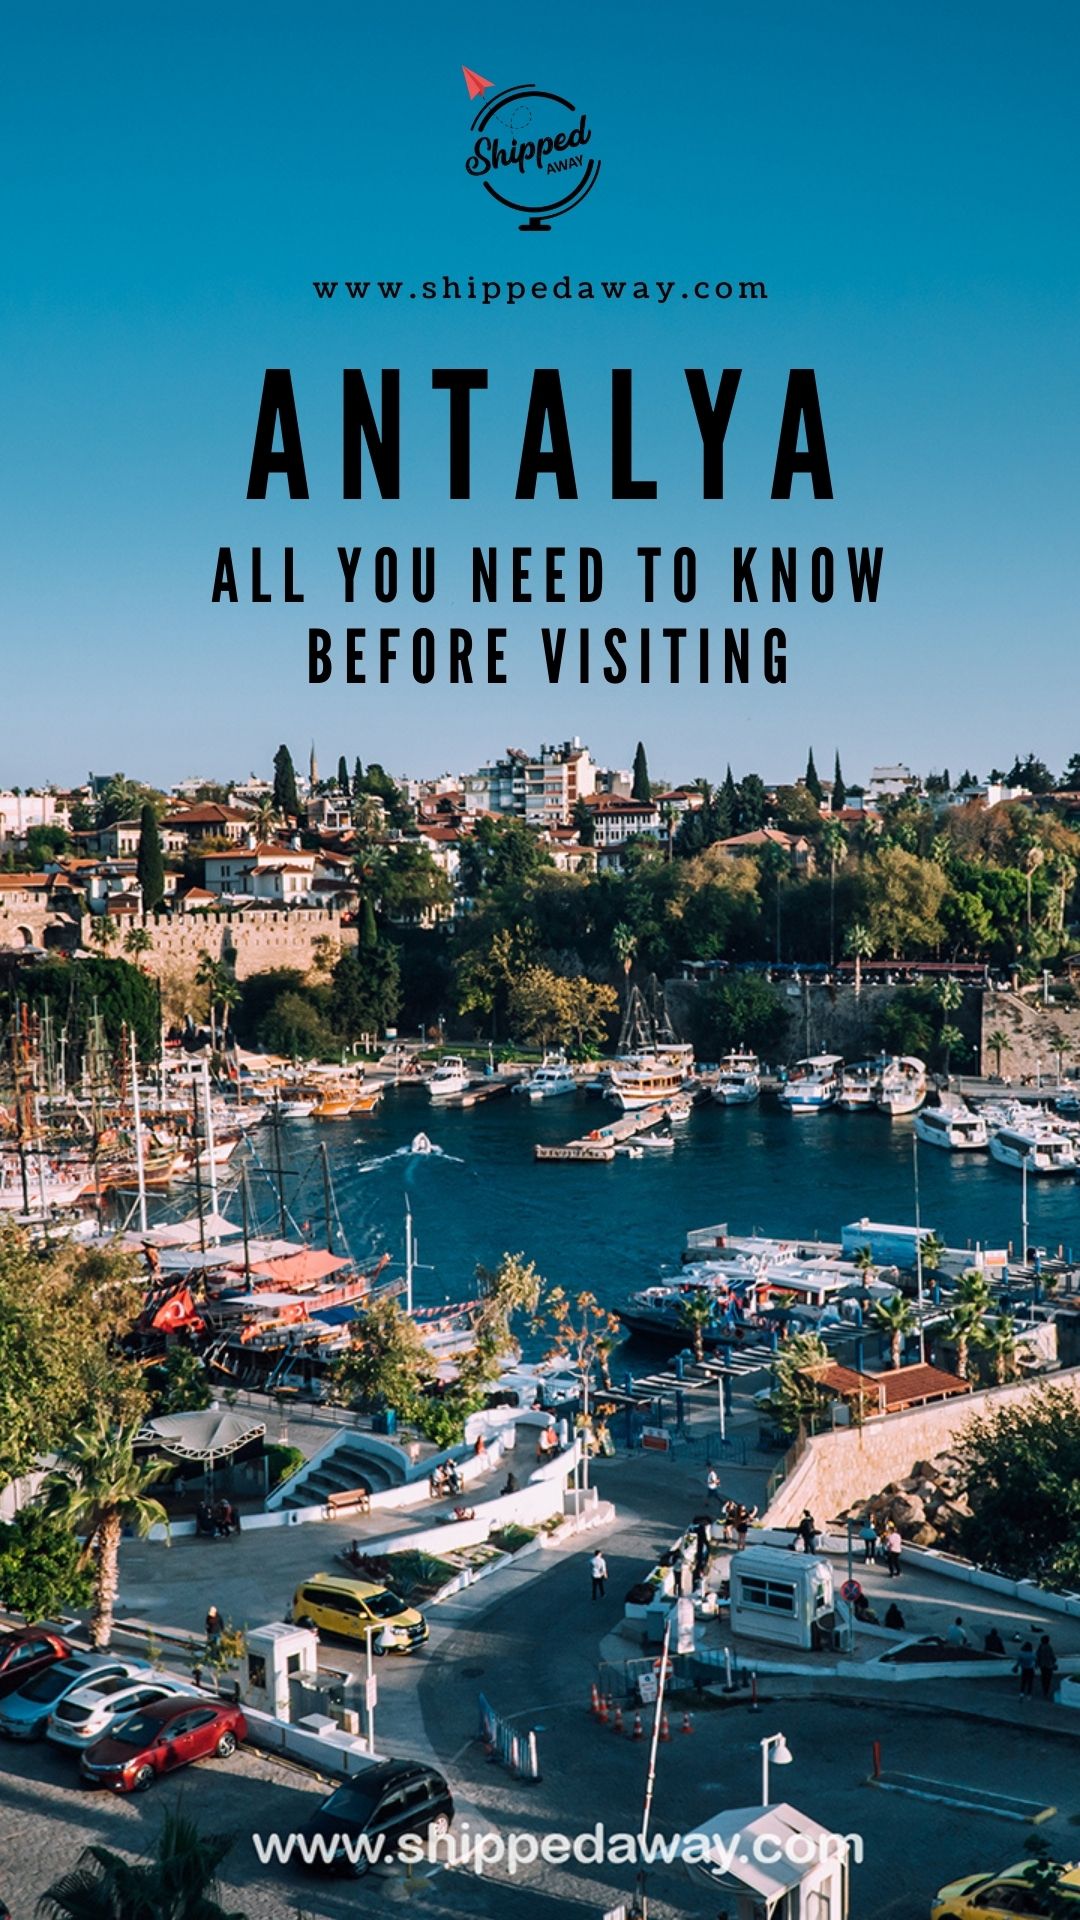 Antalya Turkey - All you need to know before visiting